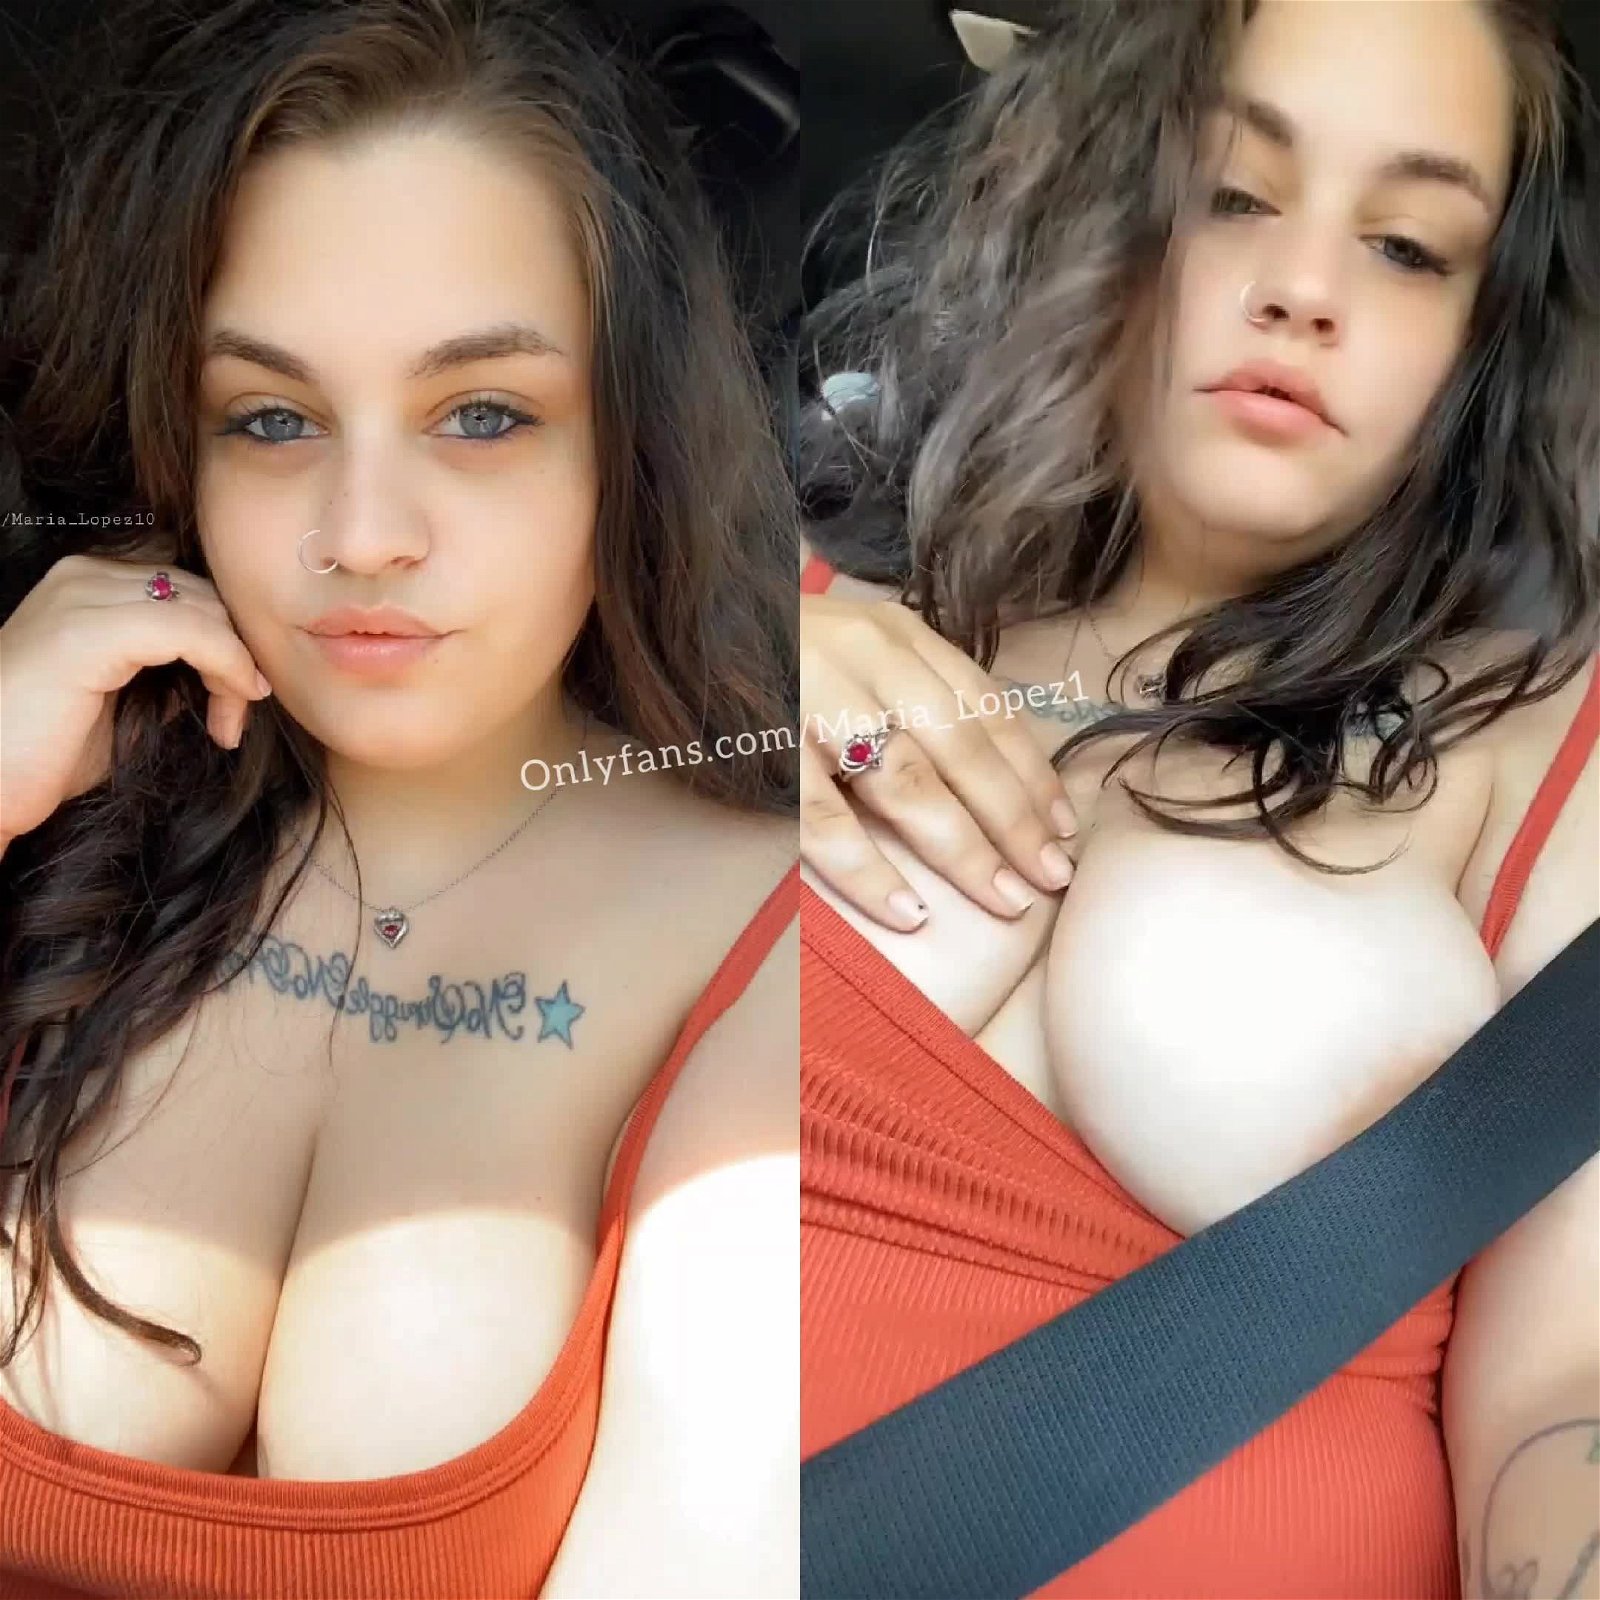 Video by Valerie Rosee with the username @ValerieRosee, who is a star user,  July 15, 2023 at 3:57 PM and the text says 'Do you like my titties? 😋 
https://linktr.ee/maria_lopez1'